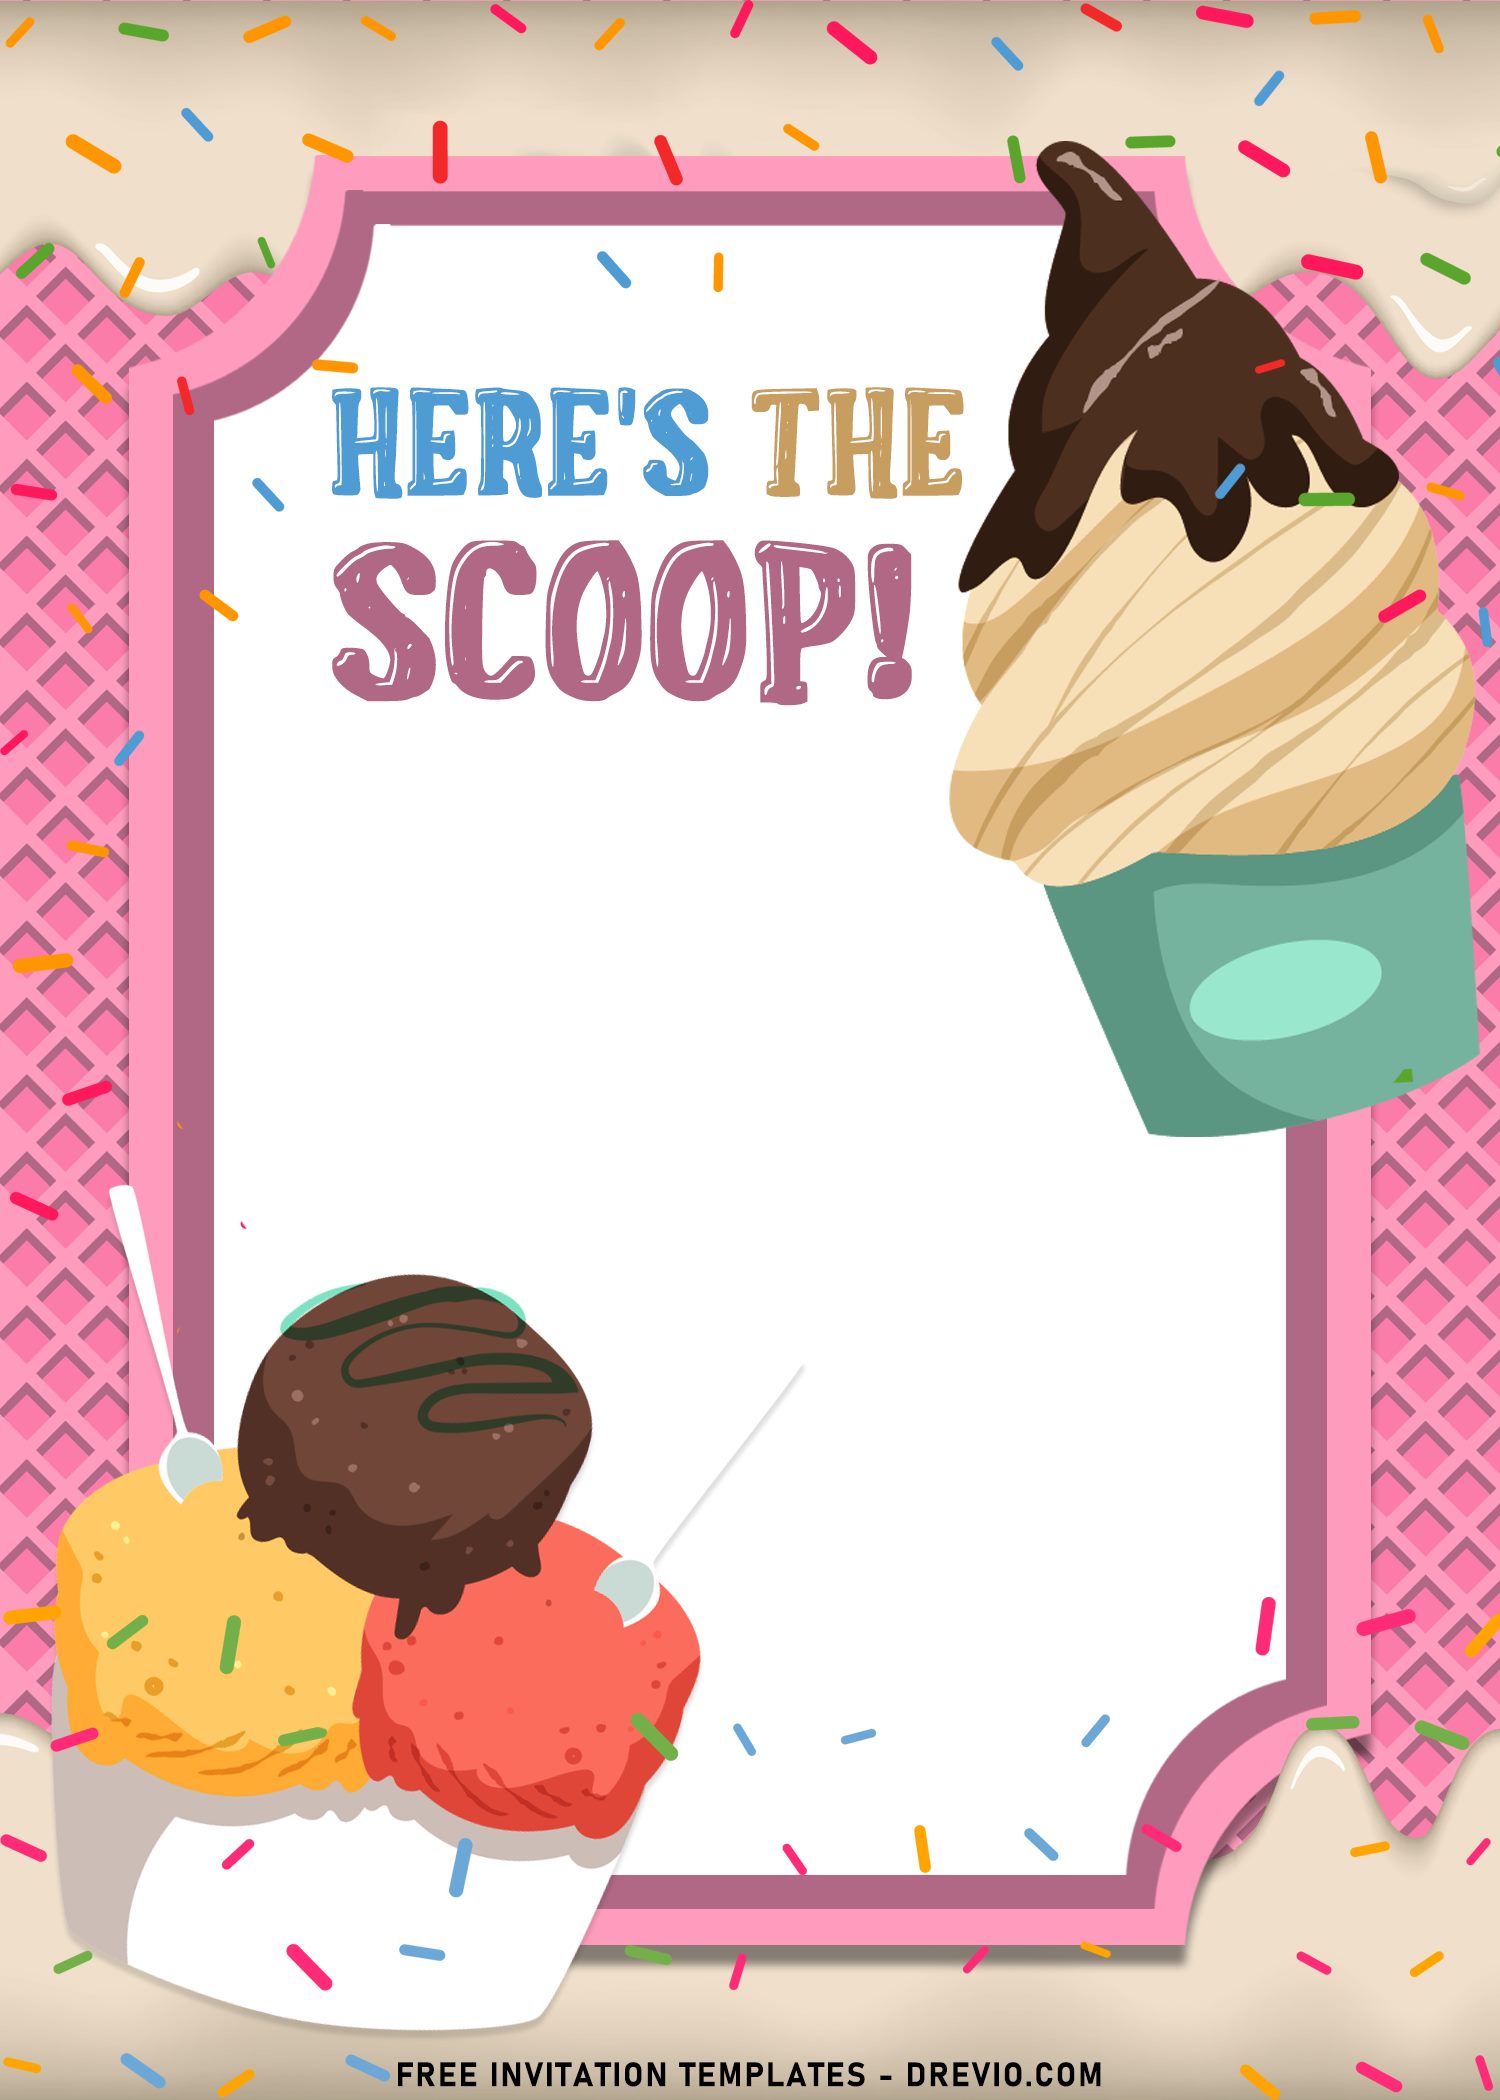 9 Ice Cream Party Invitation Templates For Kids Download Hundreds